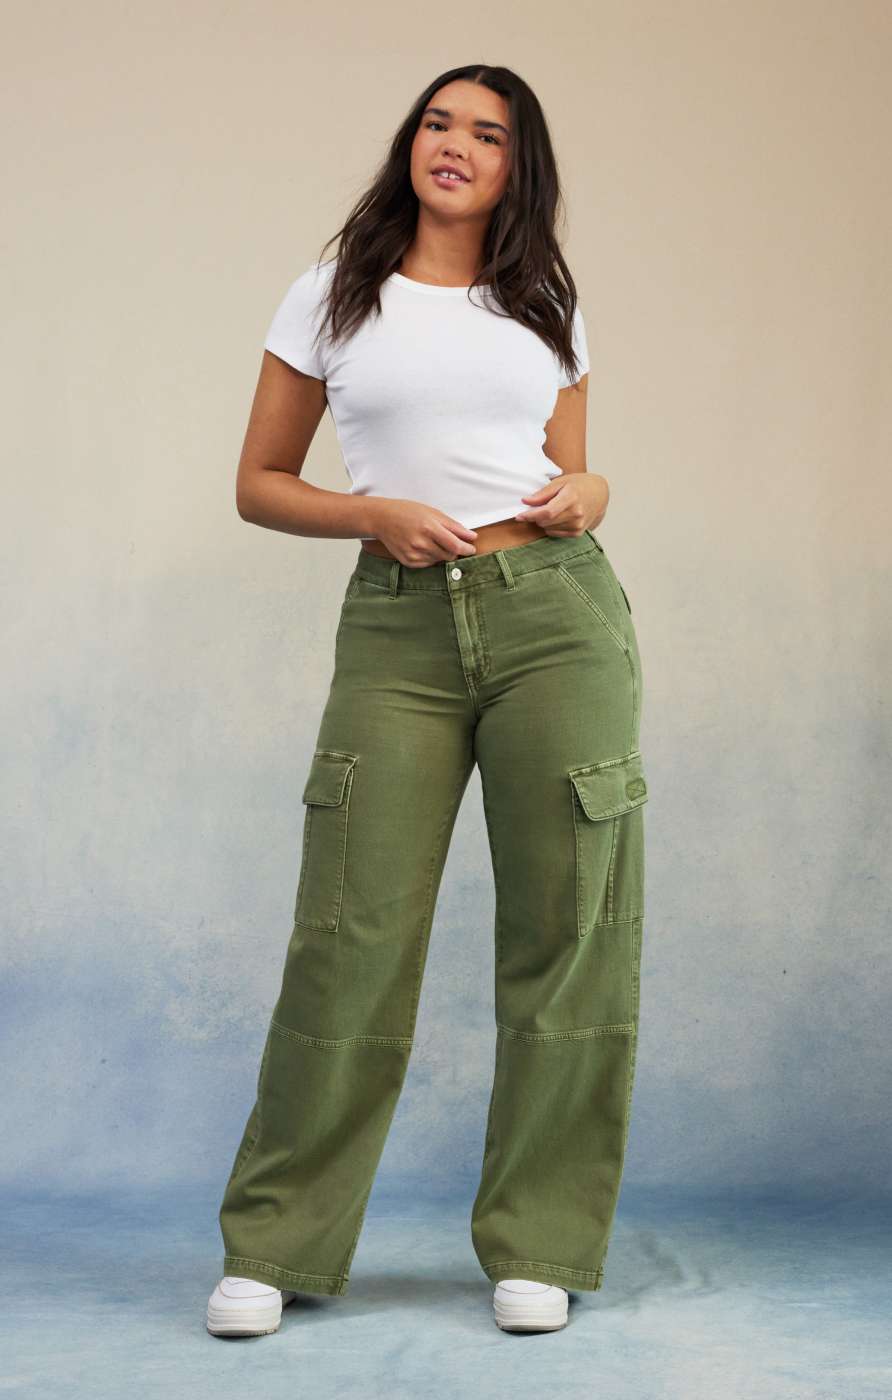 Chic High Waisted Pink Beige Trousers Women For Women Za Spring Fashion  Office Pants With Button Zip And Elegant Casual Style 211115 From Long01,  $20.07